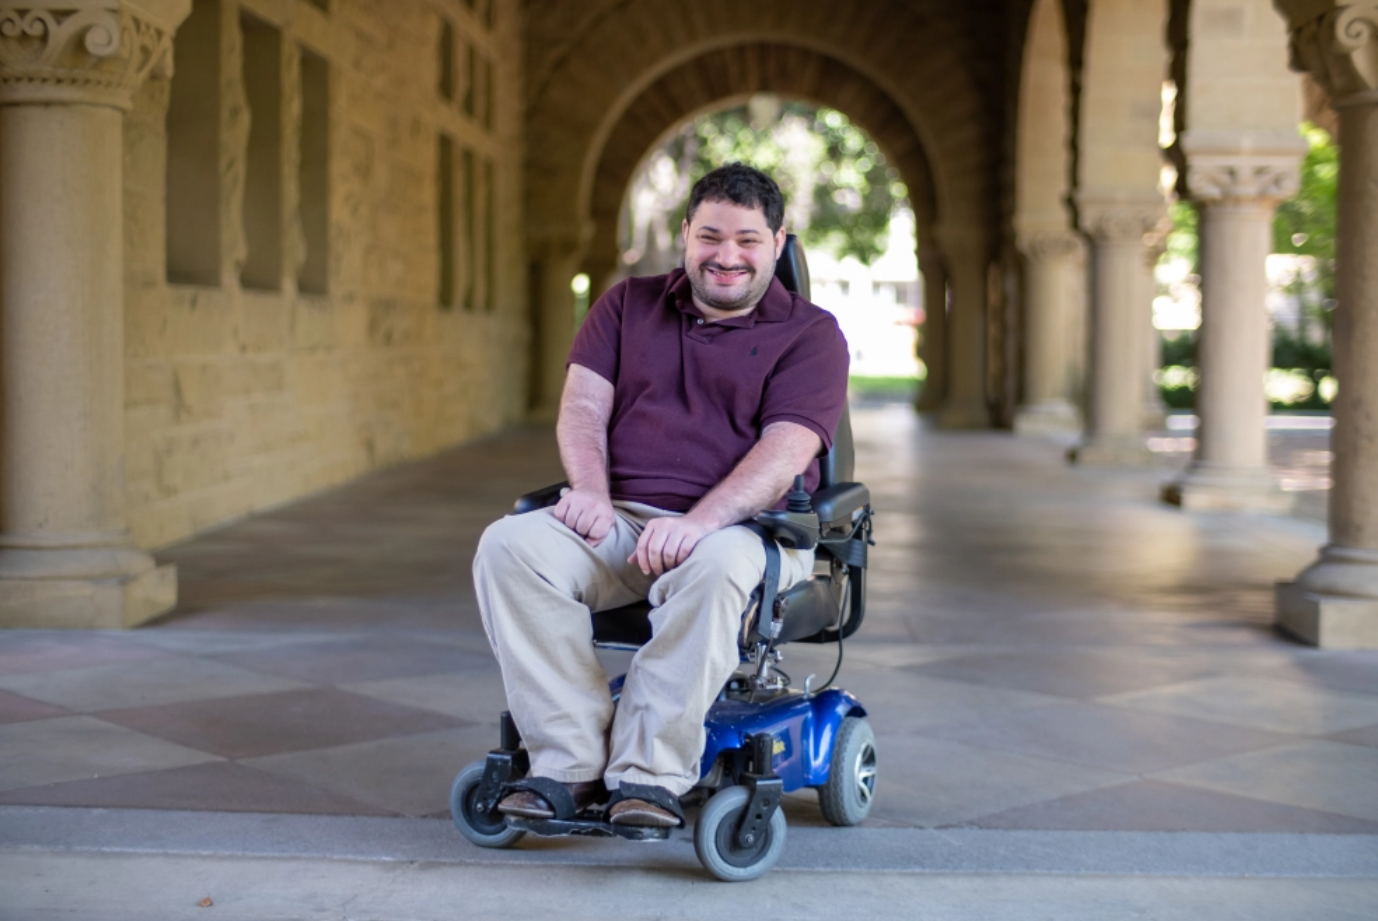 Photograph of Kevin Mintz amid columns and archways on the Stanford University campus, seated in a motorized wheelchair, smiling, and wearing a burgundy shirt and khaki pants.